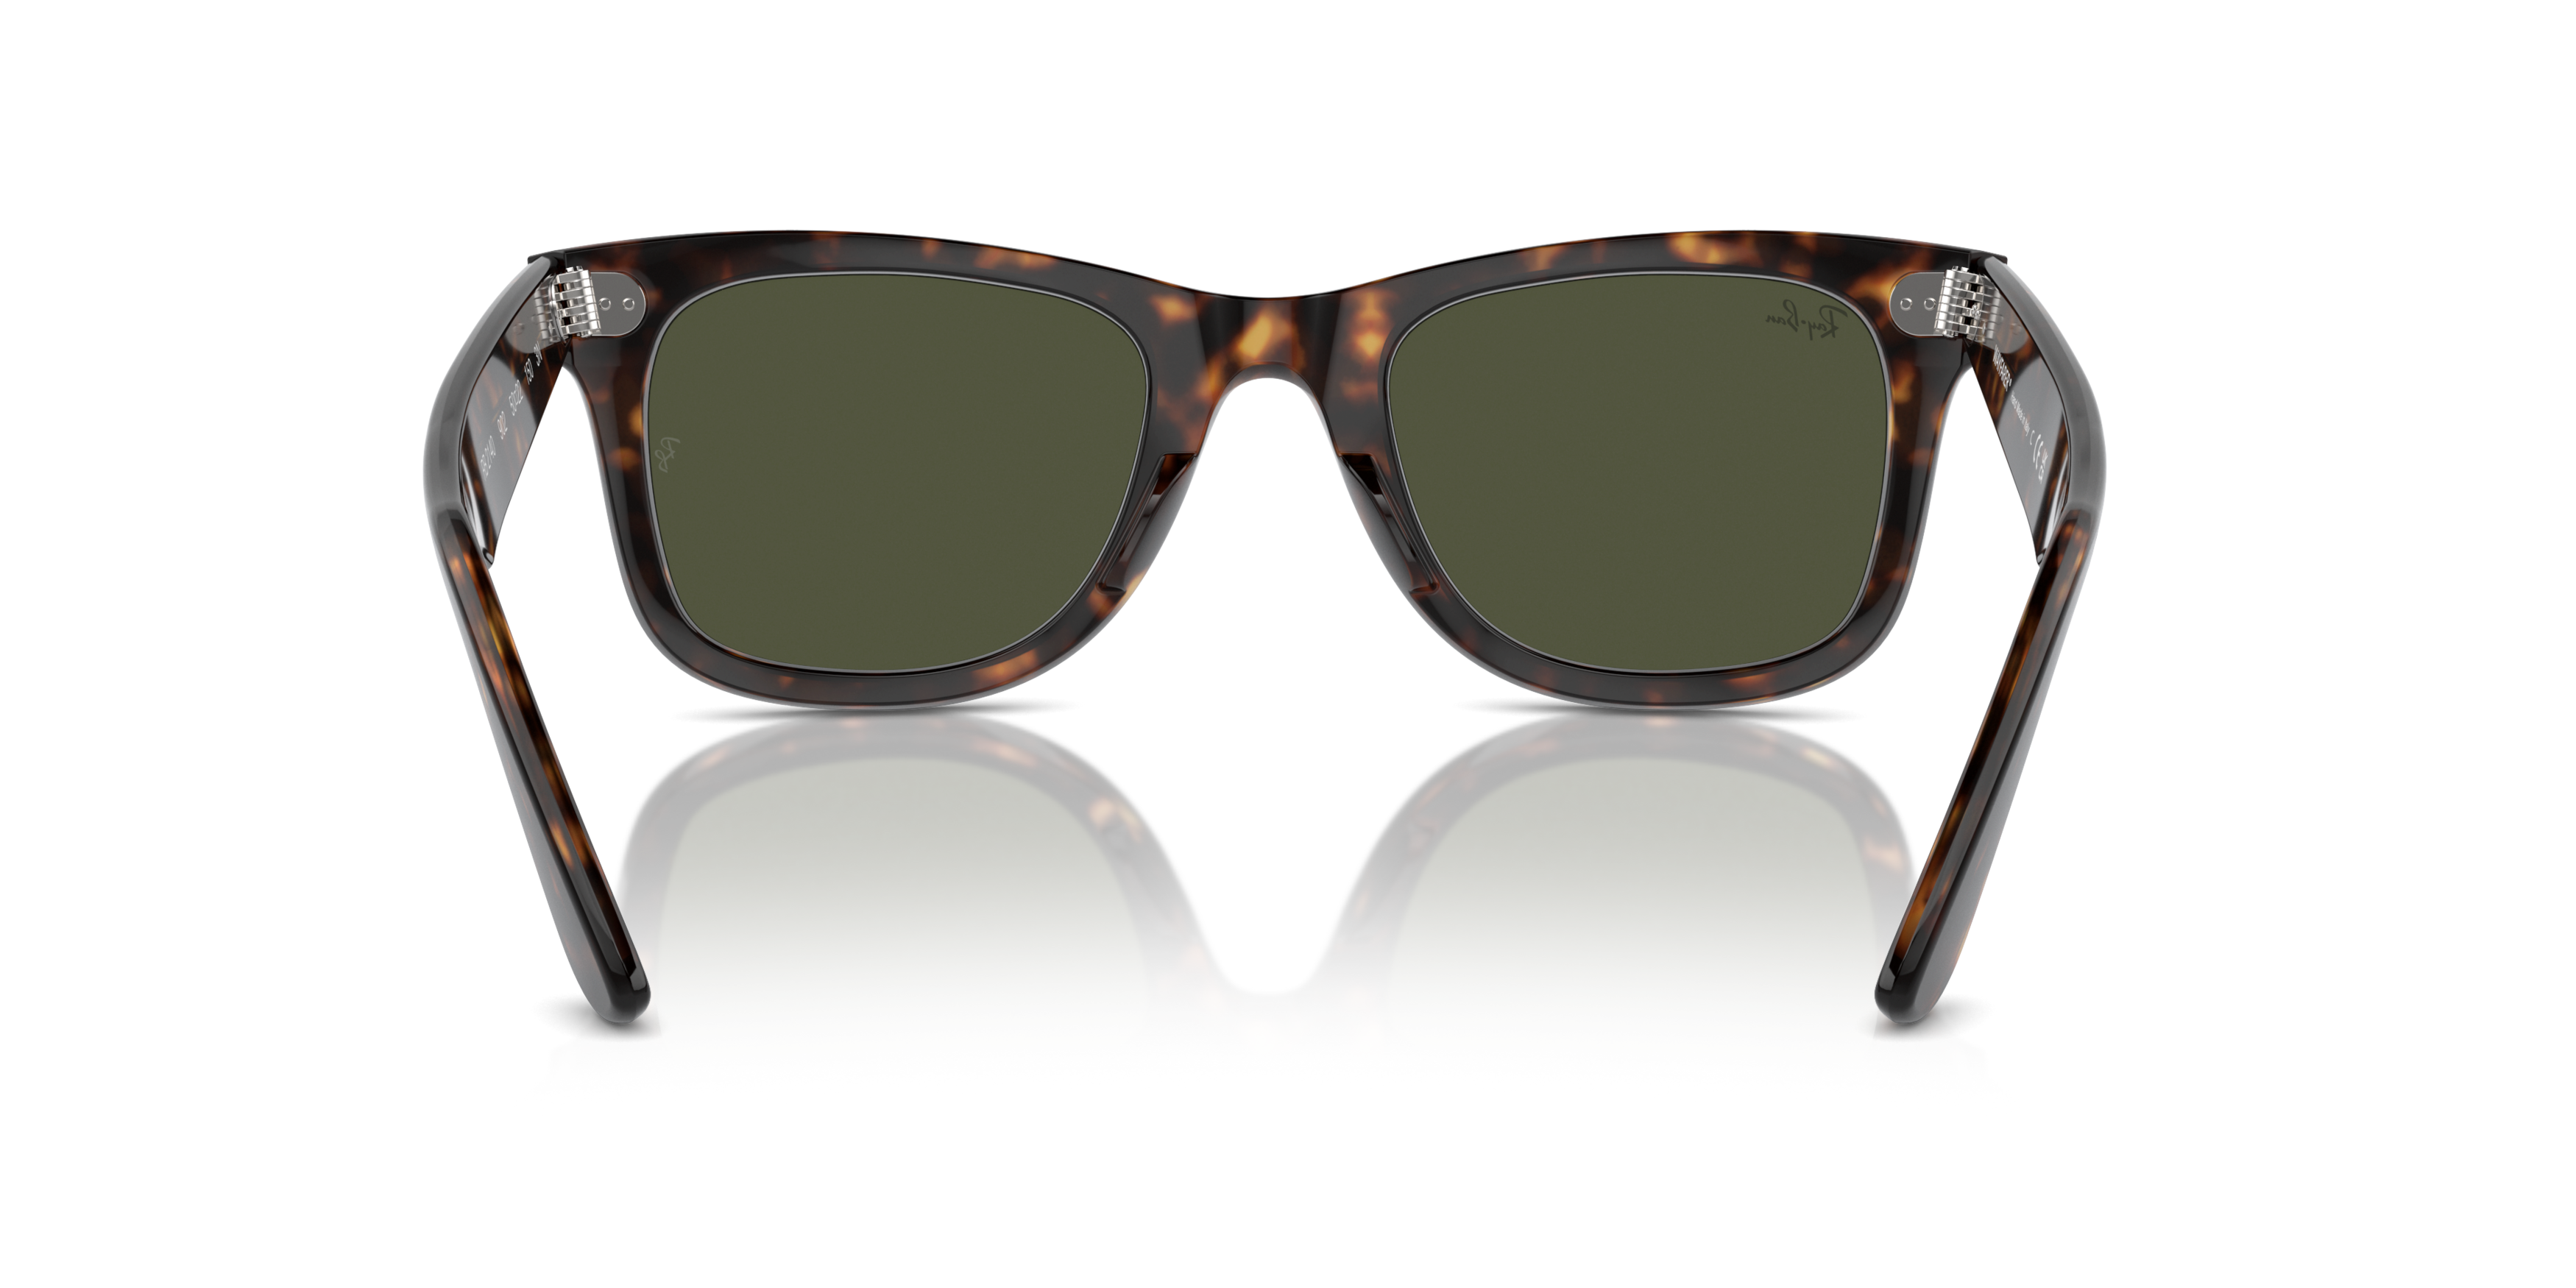 [products.image.detail02] Ray-Ban RB2140 902